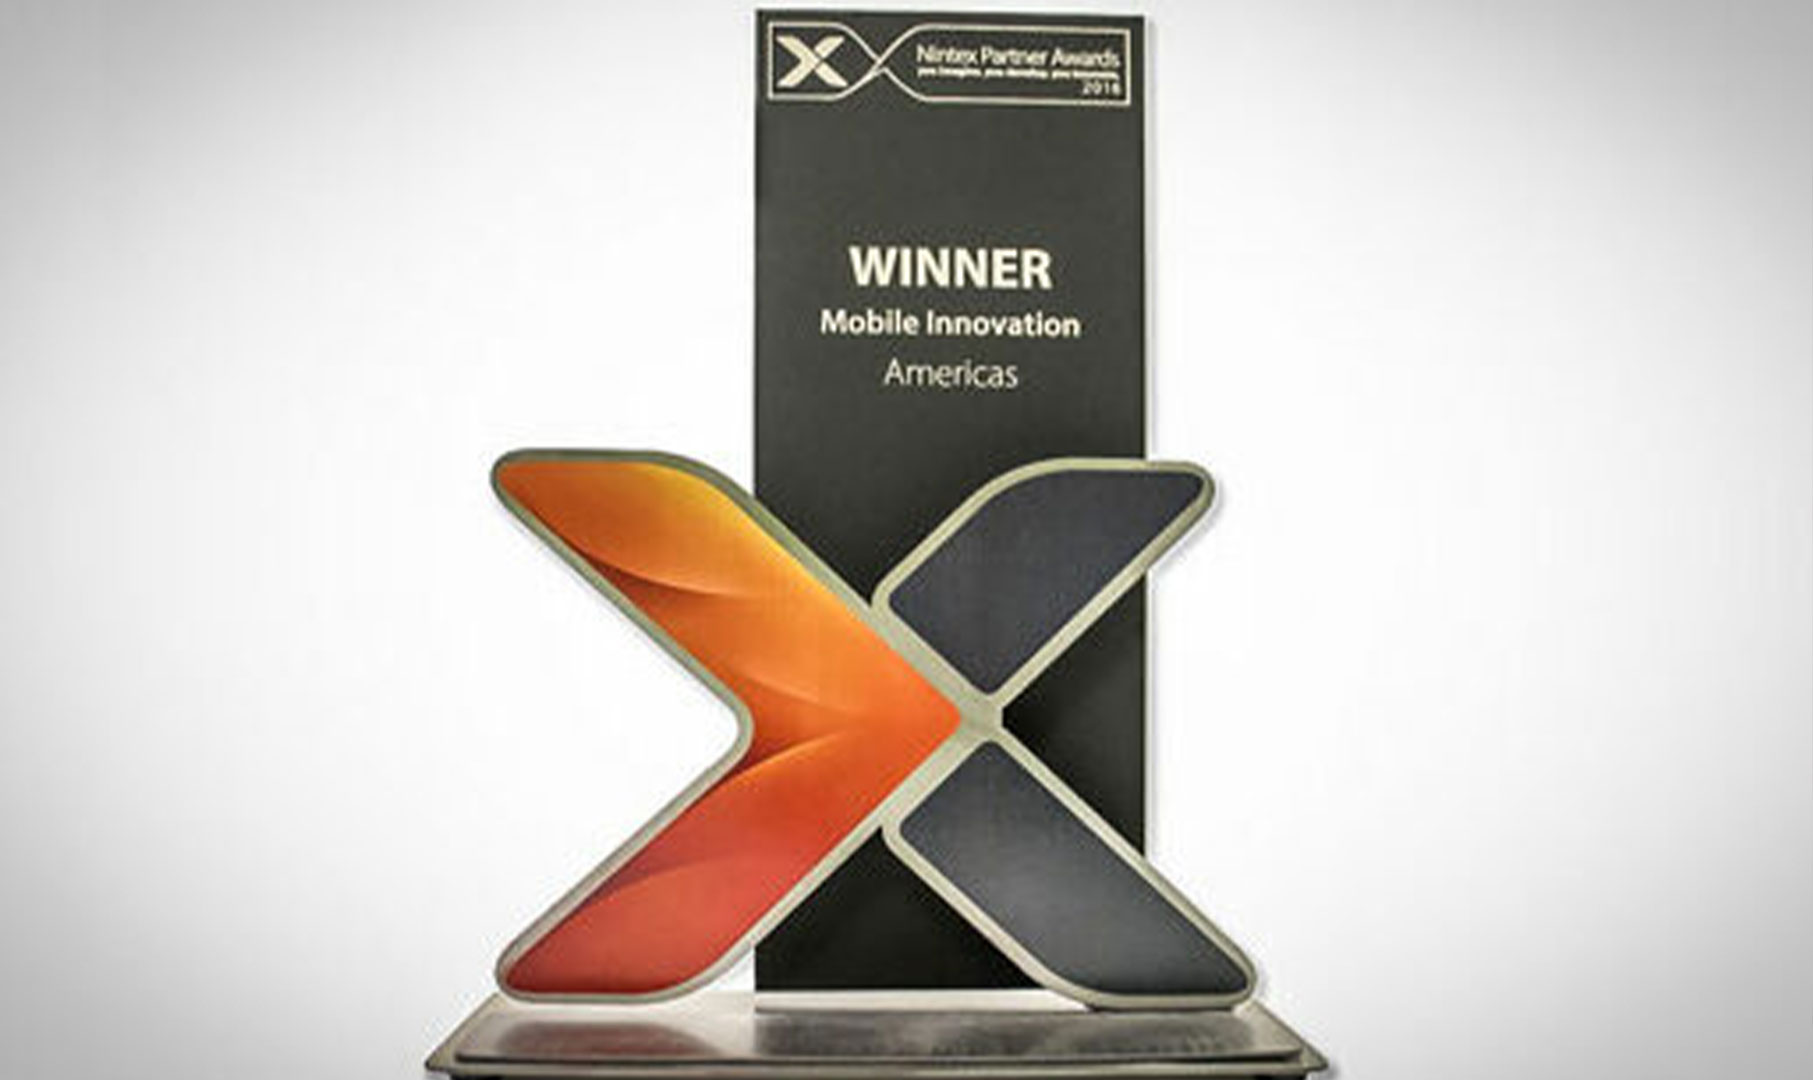 Image of custom award in the shape of an X.